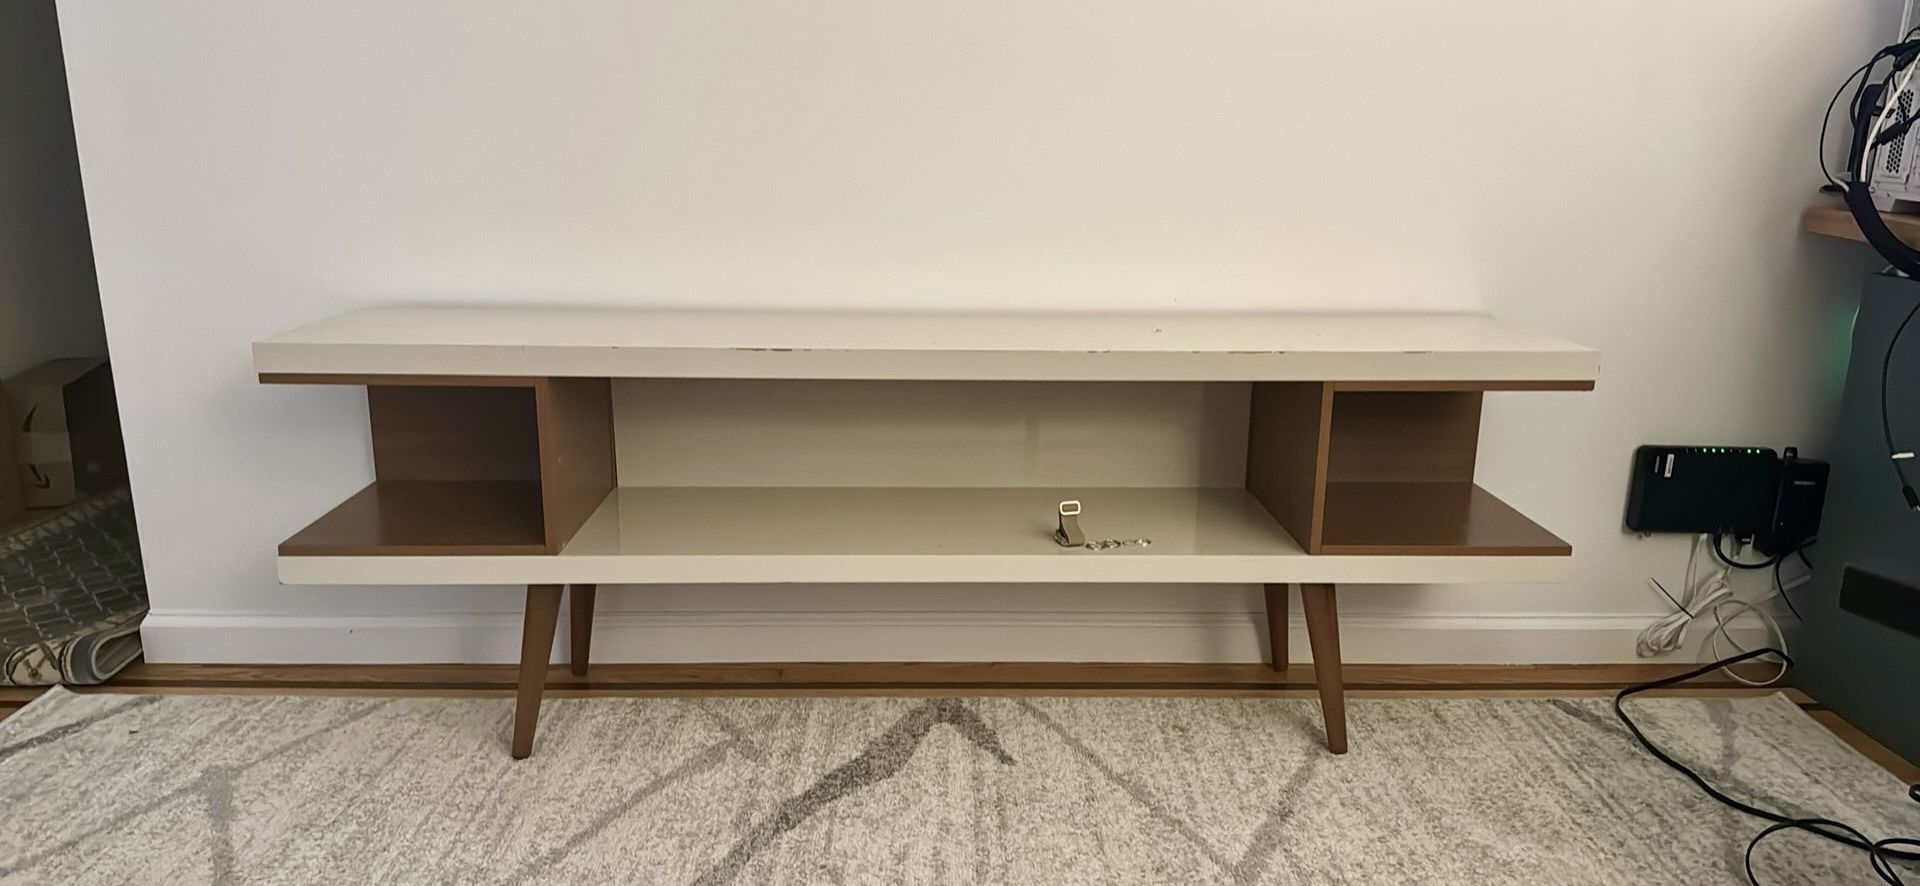 Tv Stand Off White 